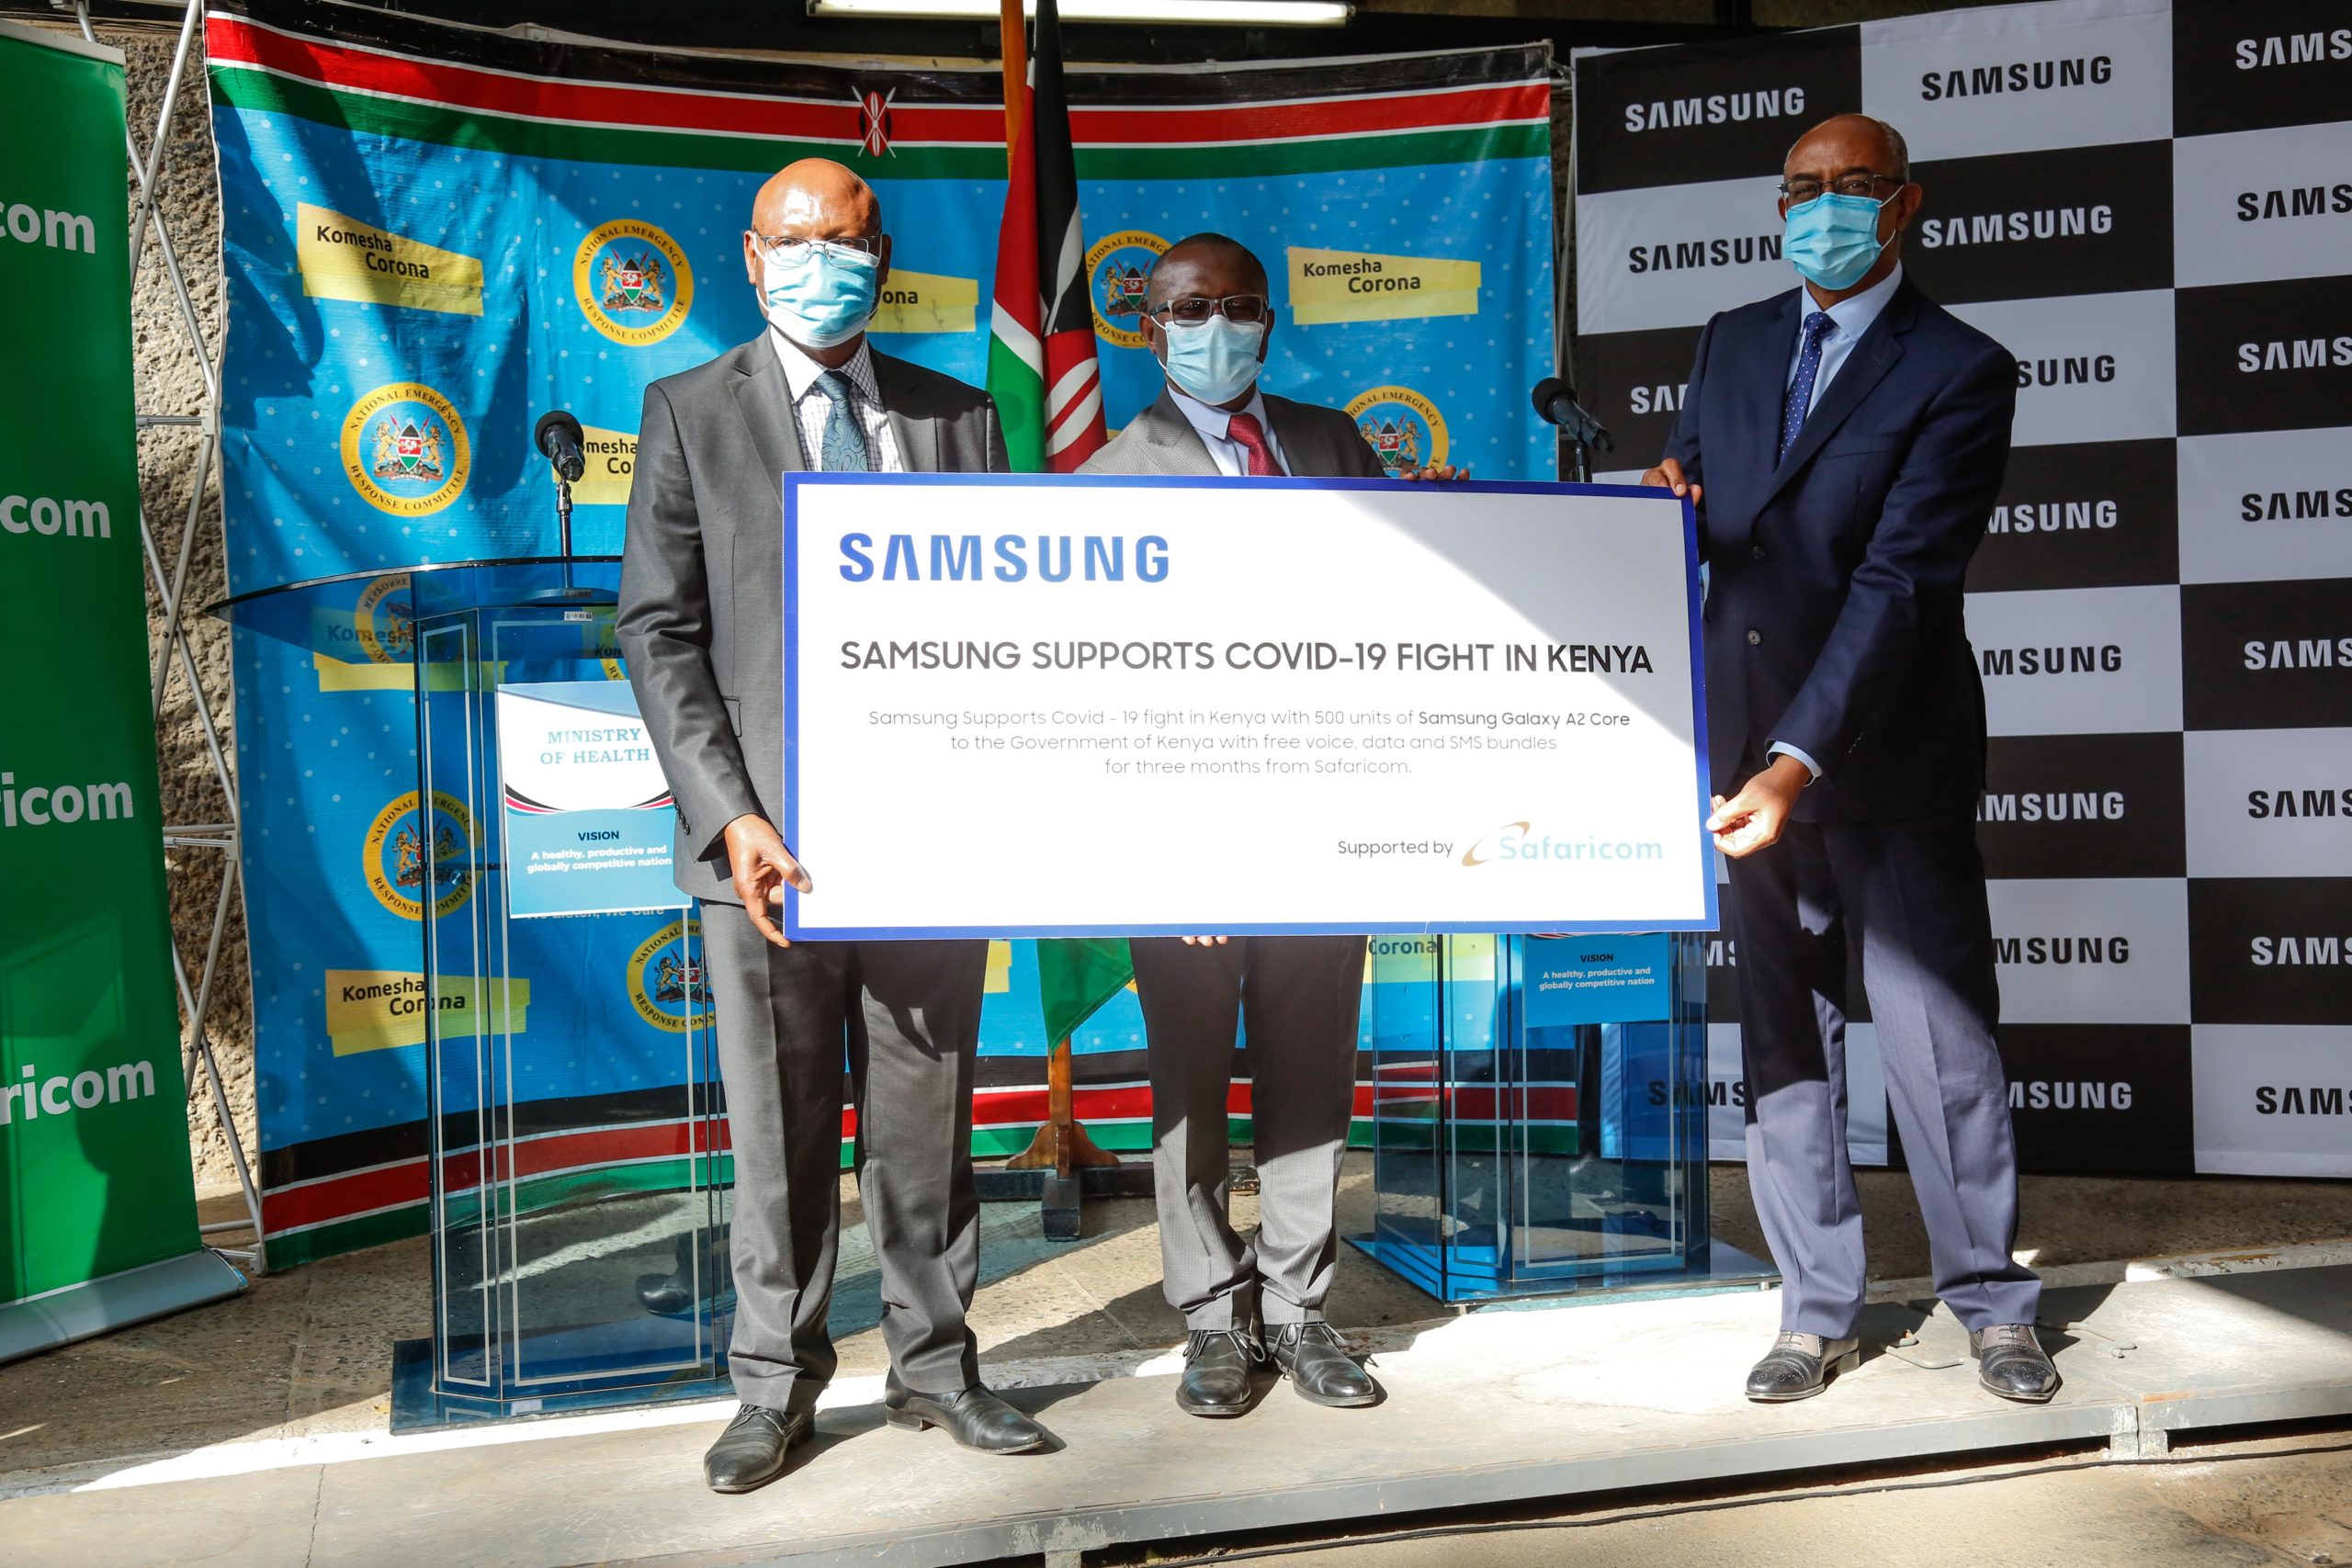 Samsung and Safaricom offer phones and monthly airtime to frontline health workers